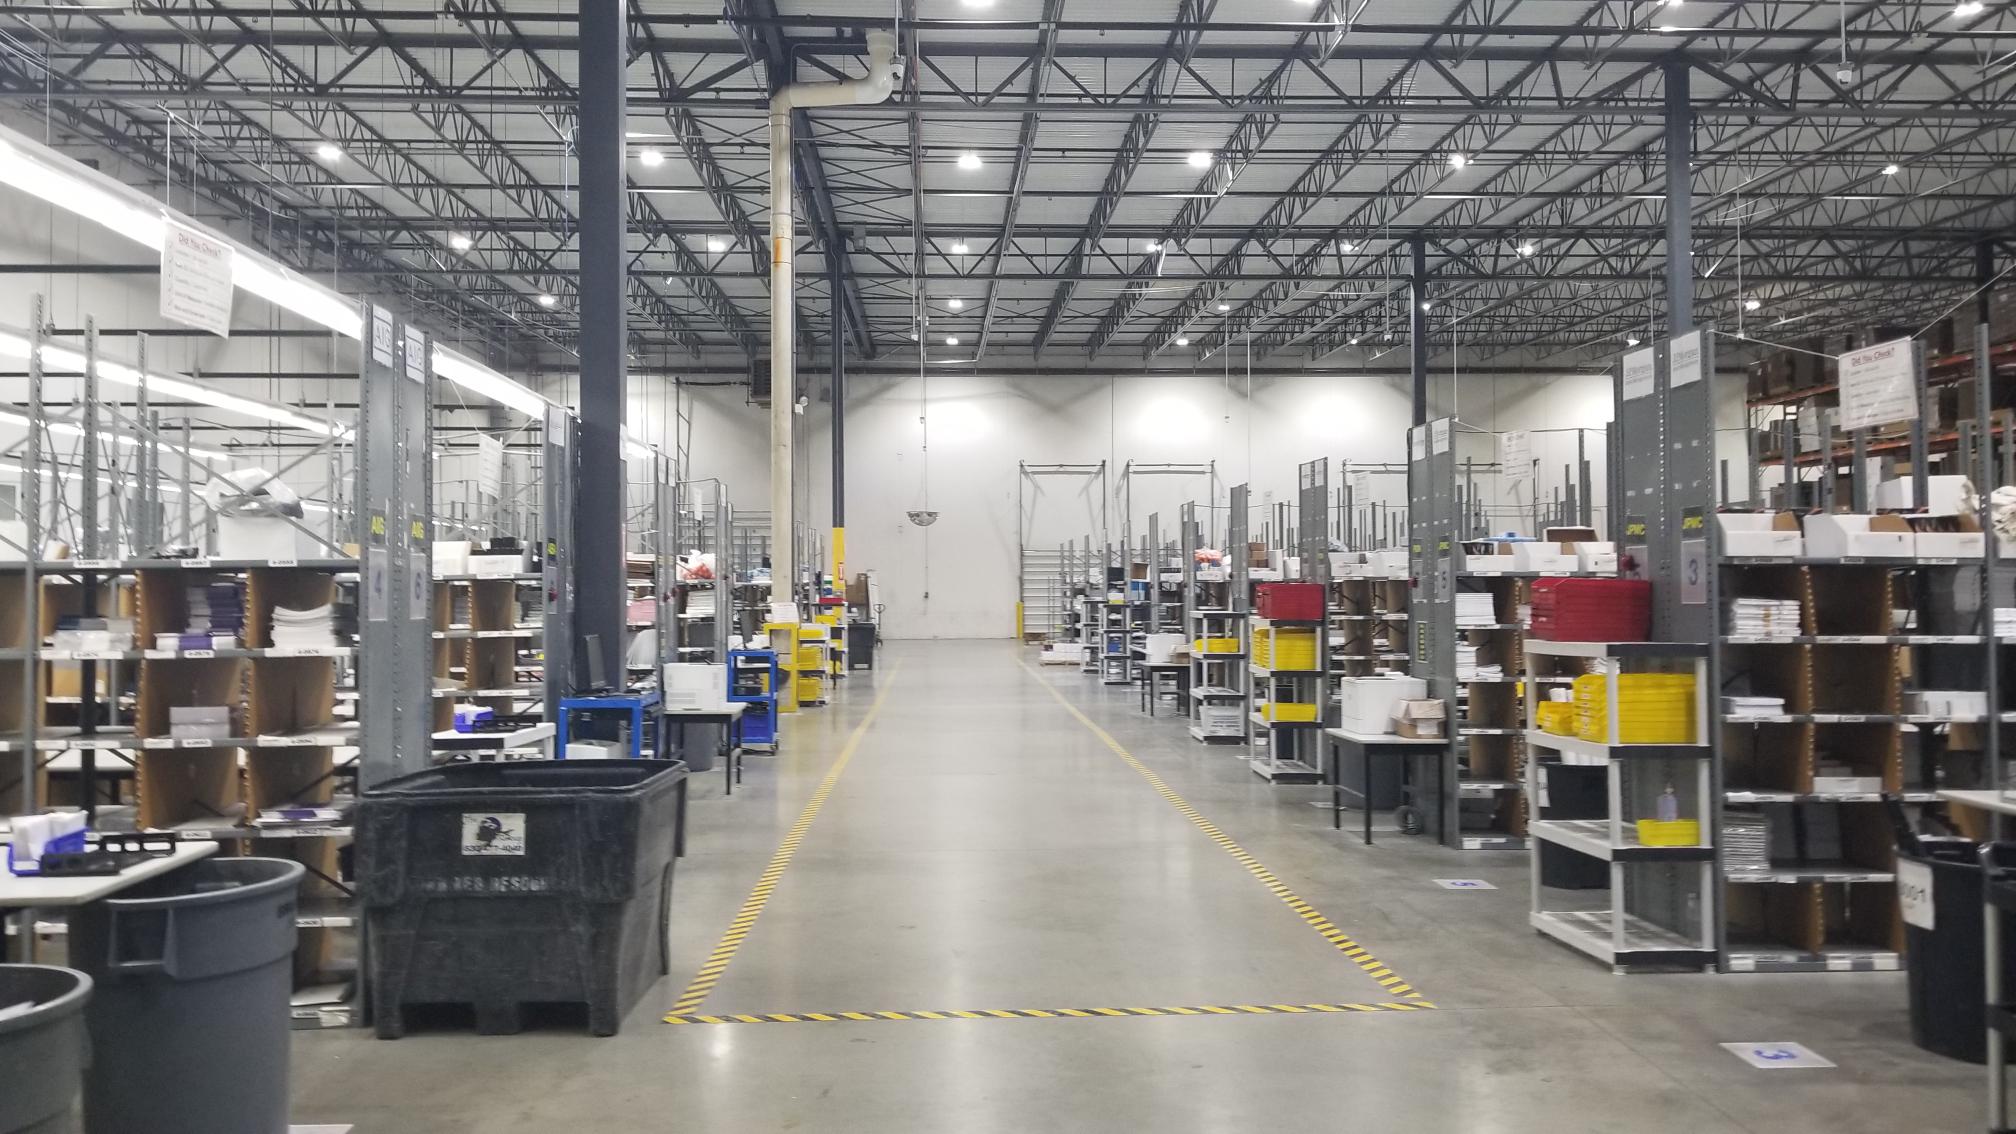 Warehouse Lighting with Shinetoo's Gen2 UFO Highbay and Magnetic Strip